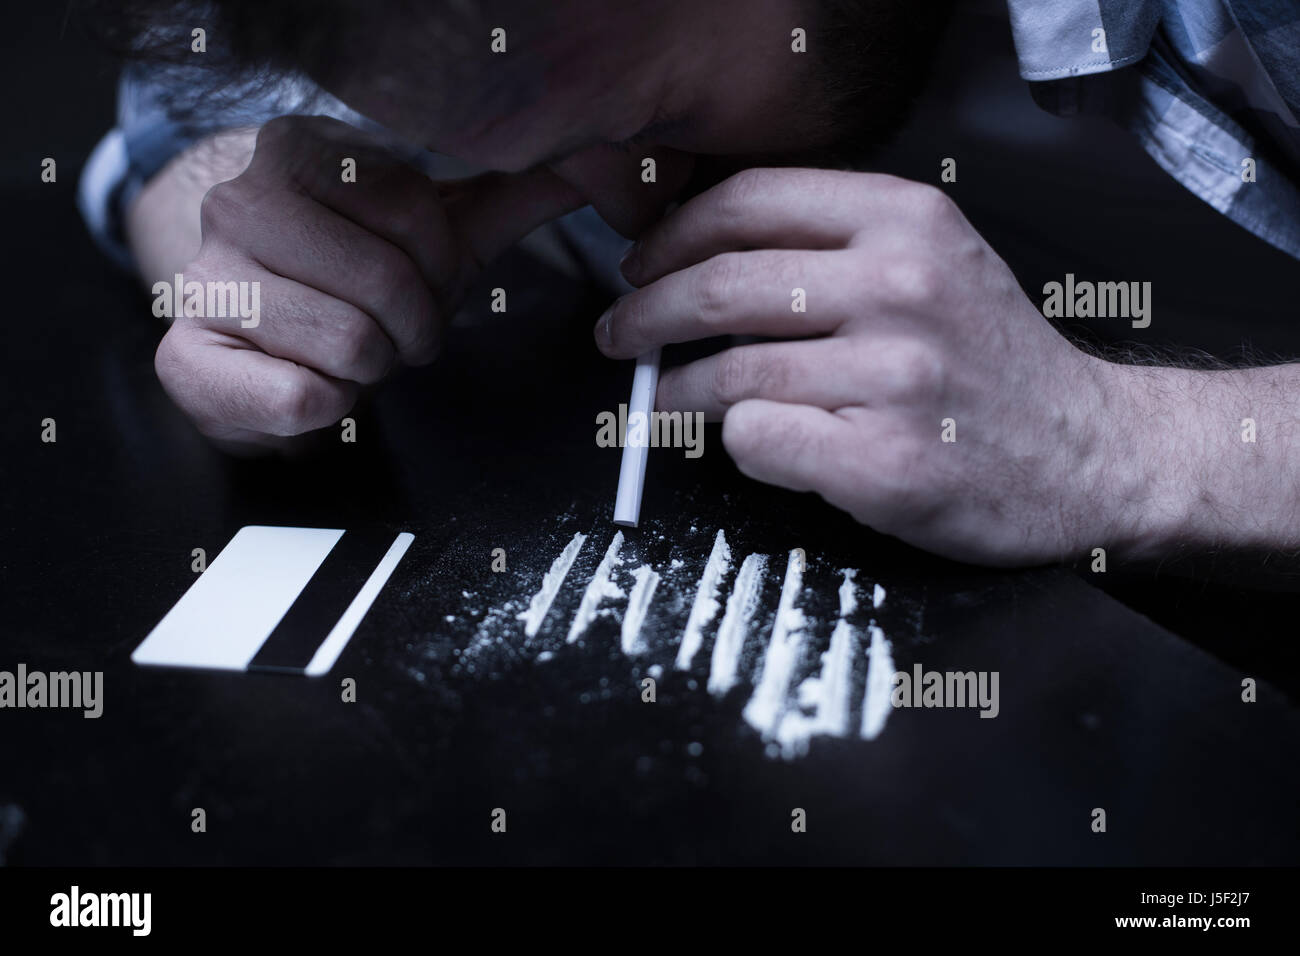 Involved drug addict inhaling cocaine lines in the dark place Stock Photo